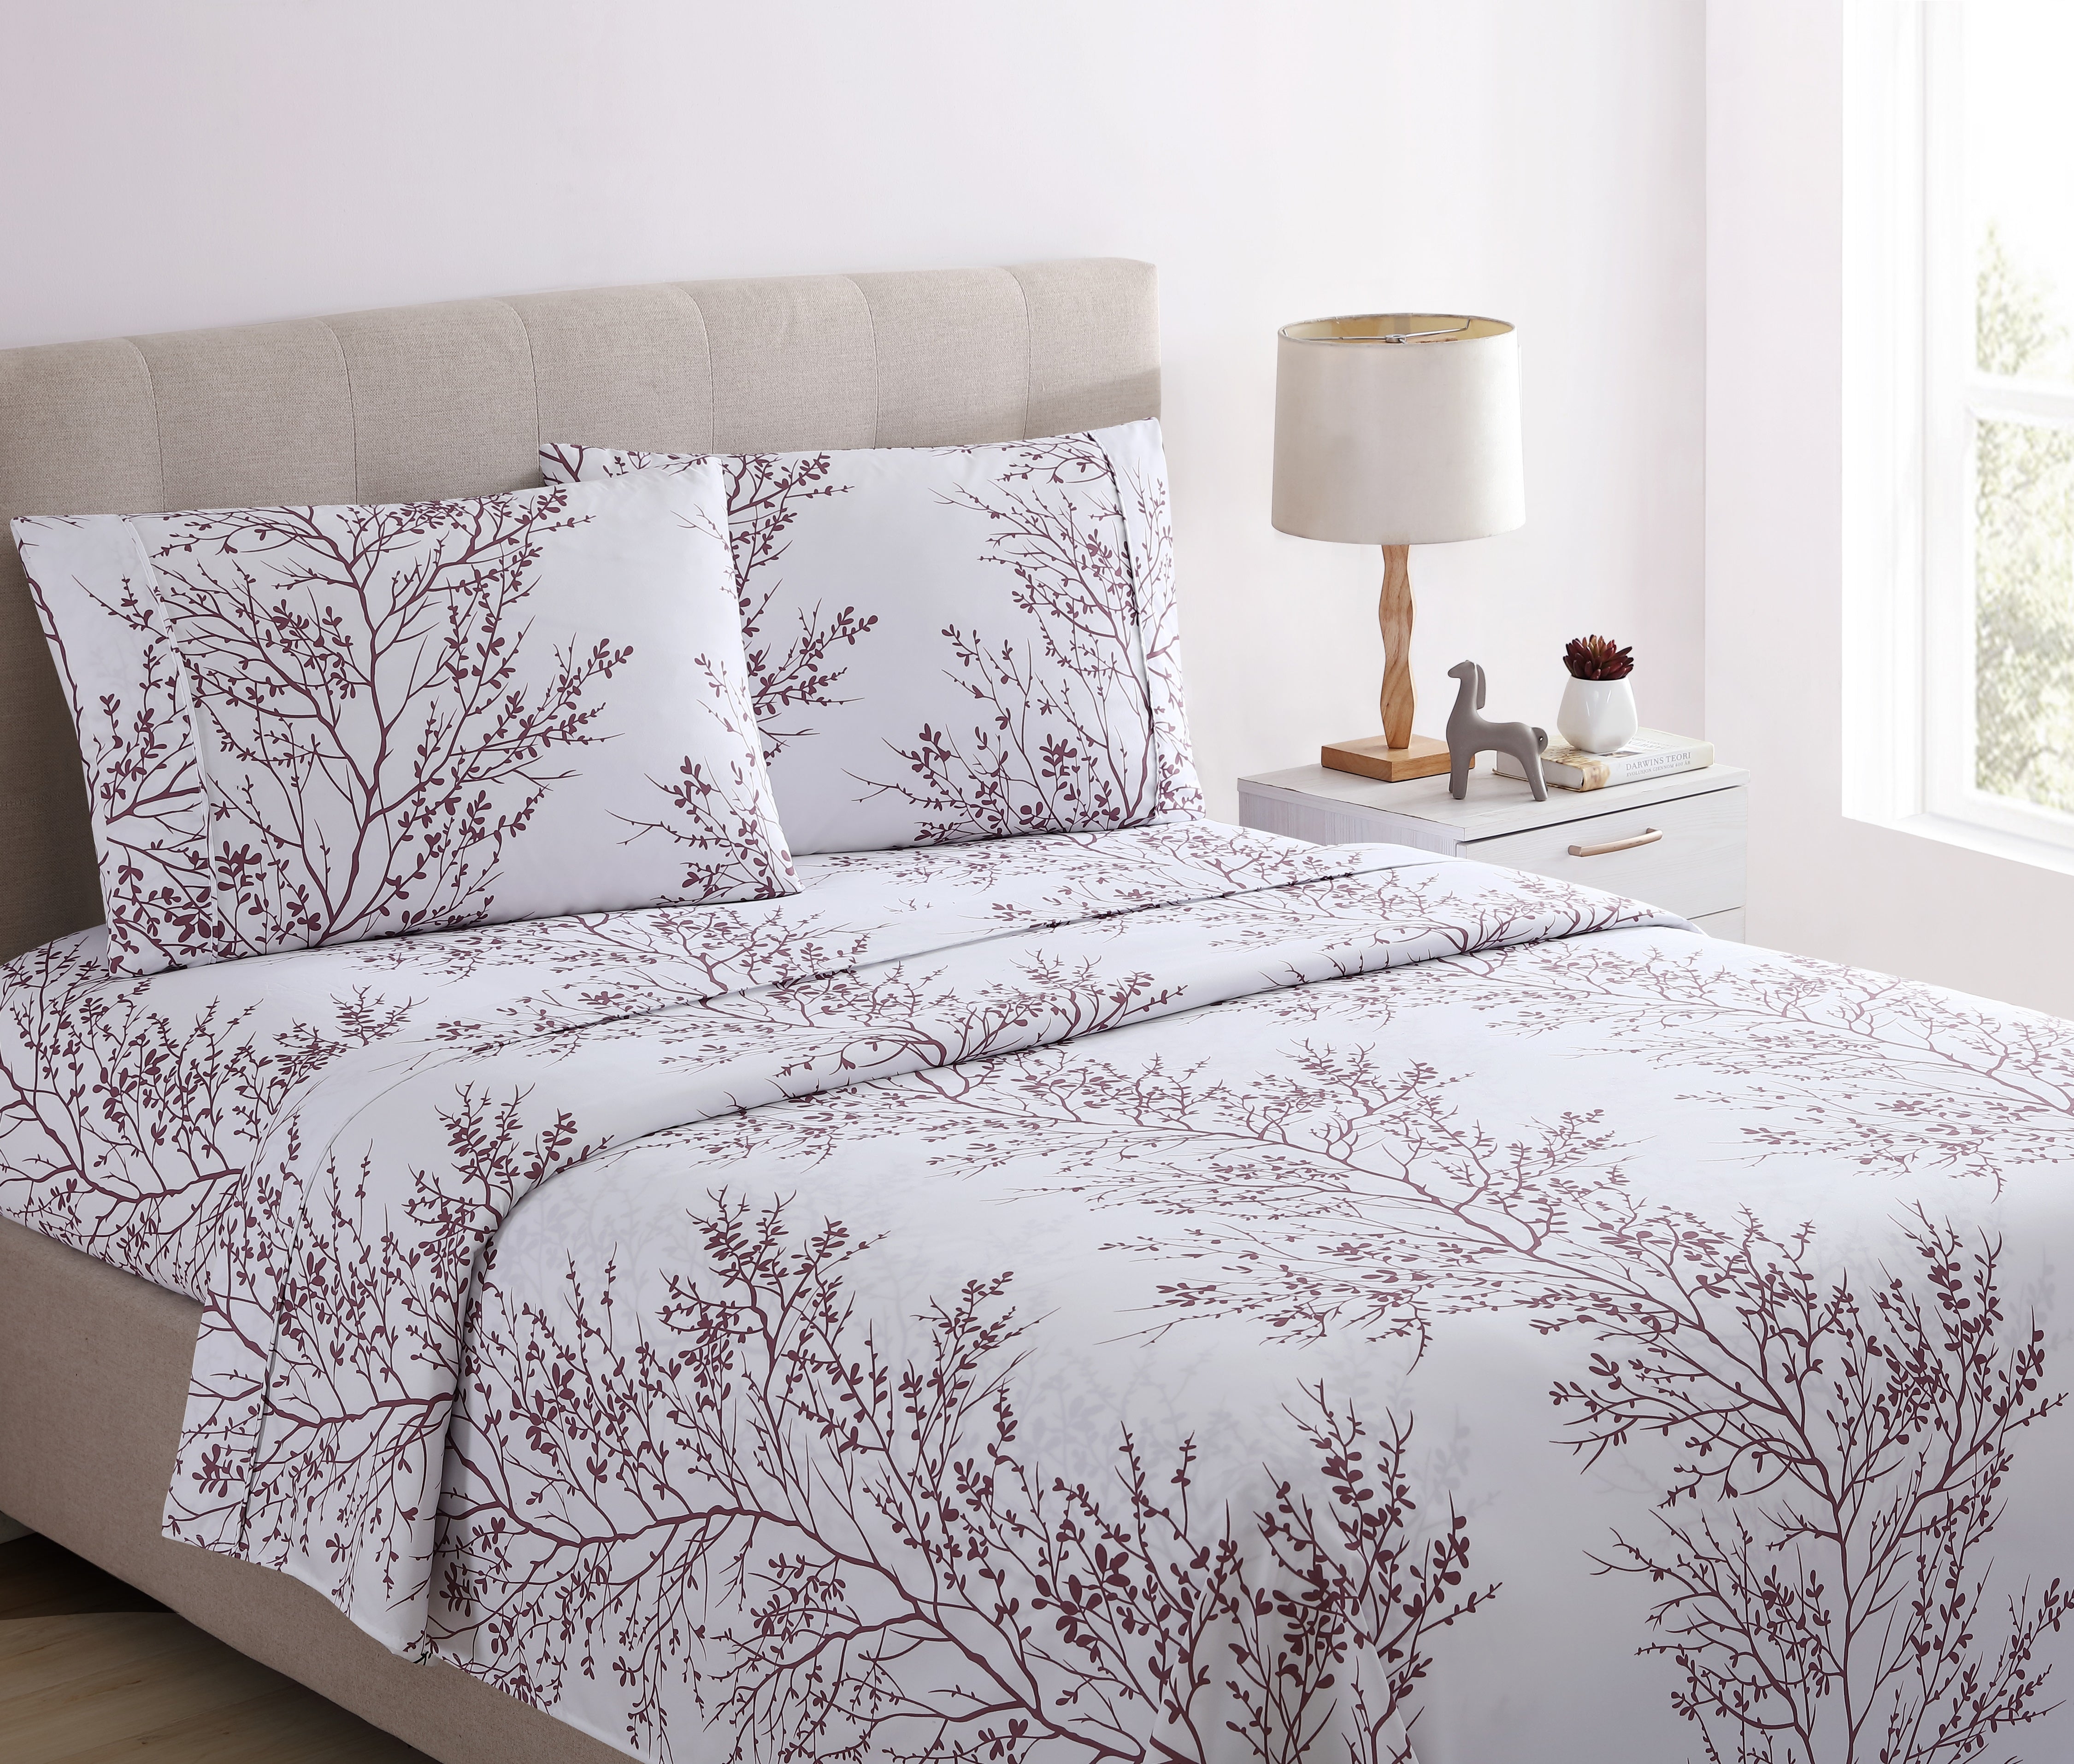 How to Choose the Best Bed Sheets